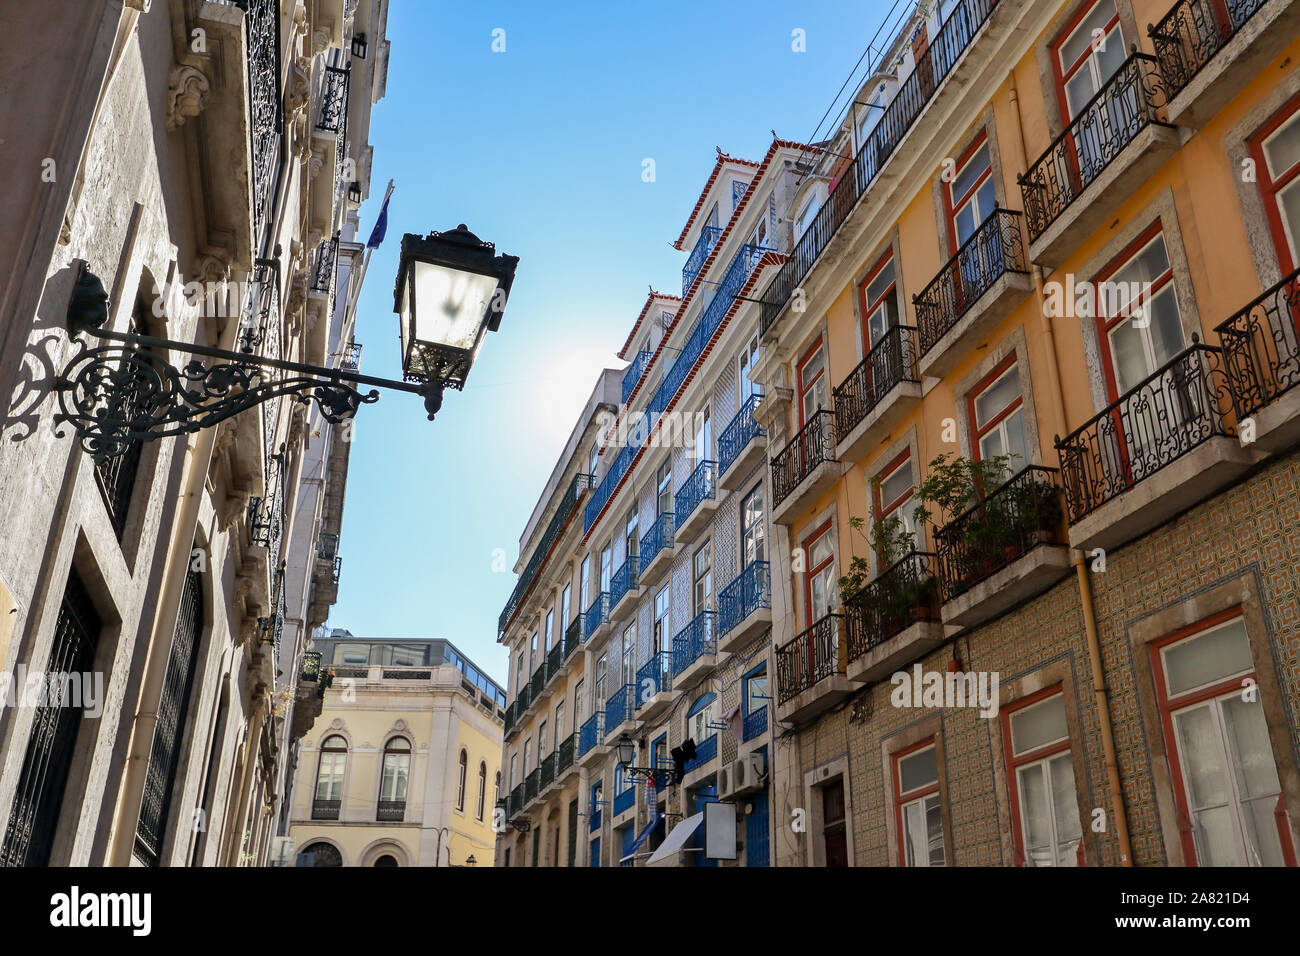 View to the Bairro Alto district in the historic center of Lisbon, traditional facades in the streets of the old town, Portugal Europe Stock Photo